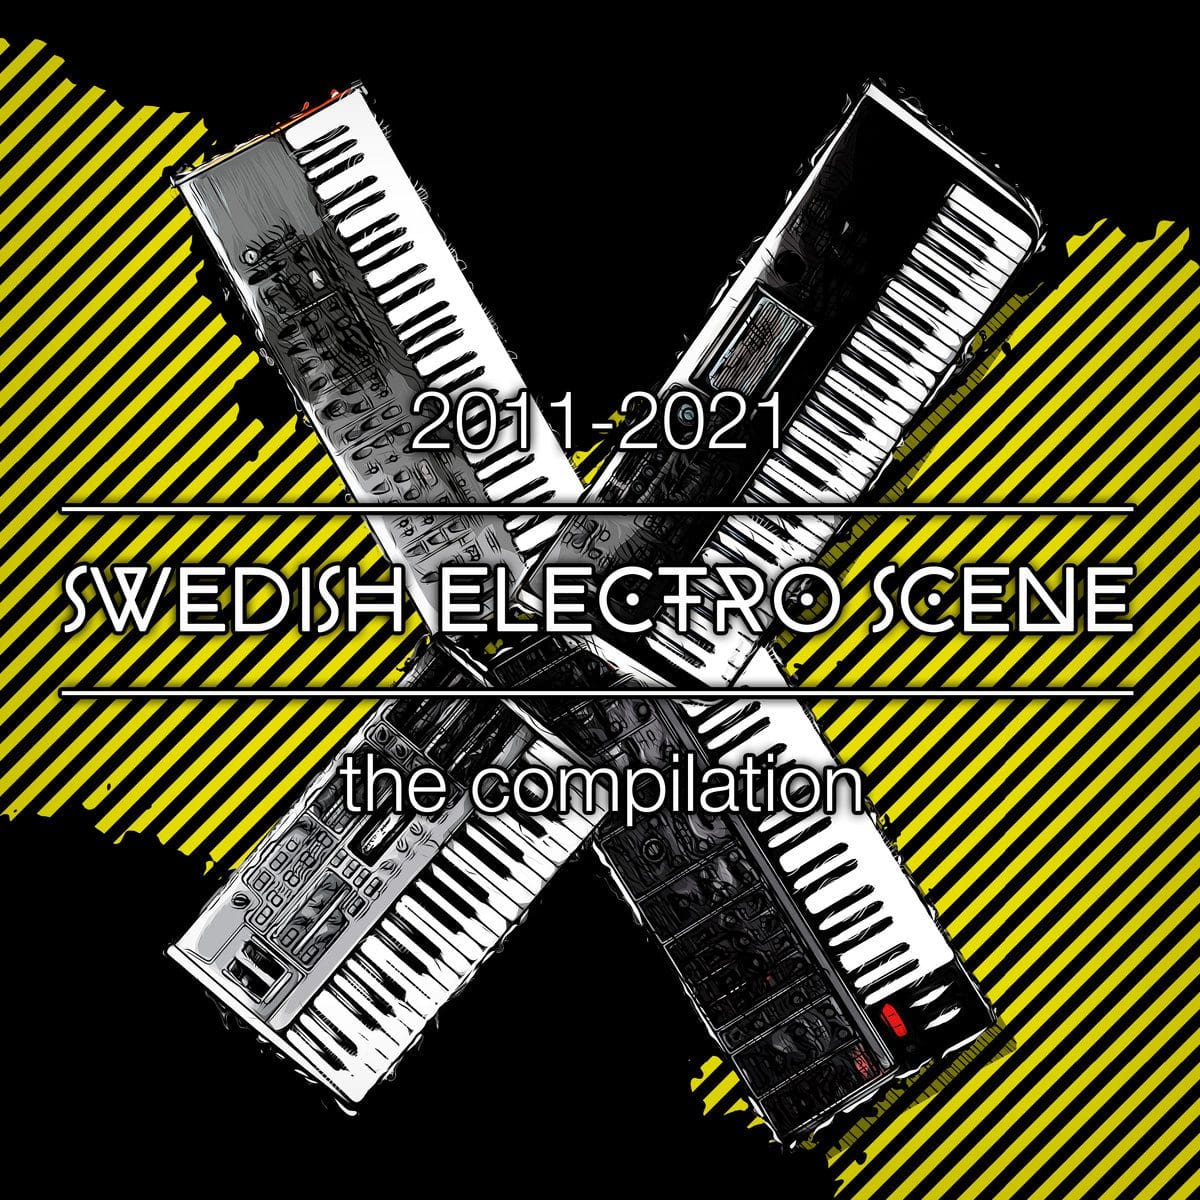 Brand new download compilation from Swedish Electro Scene Facebook page: '2011-2021 Swedish Electro Scene the compilation'